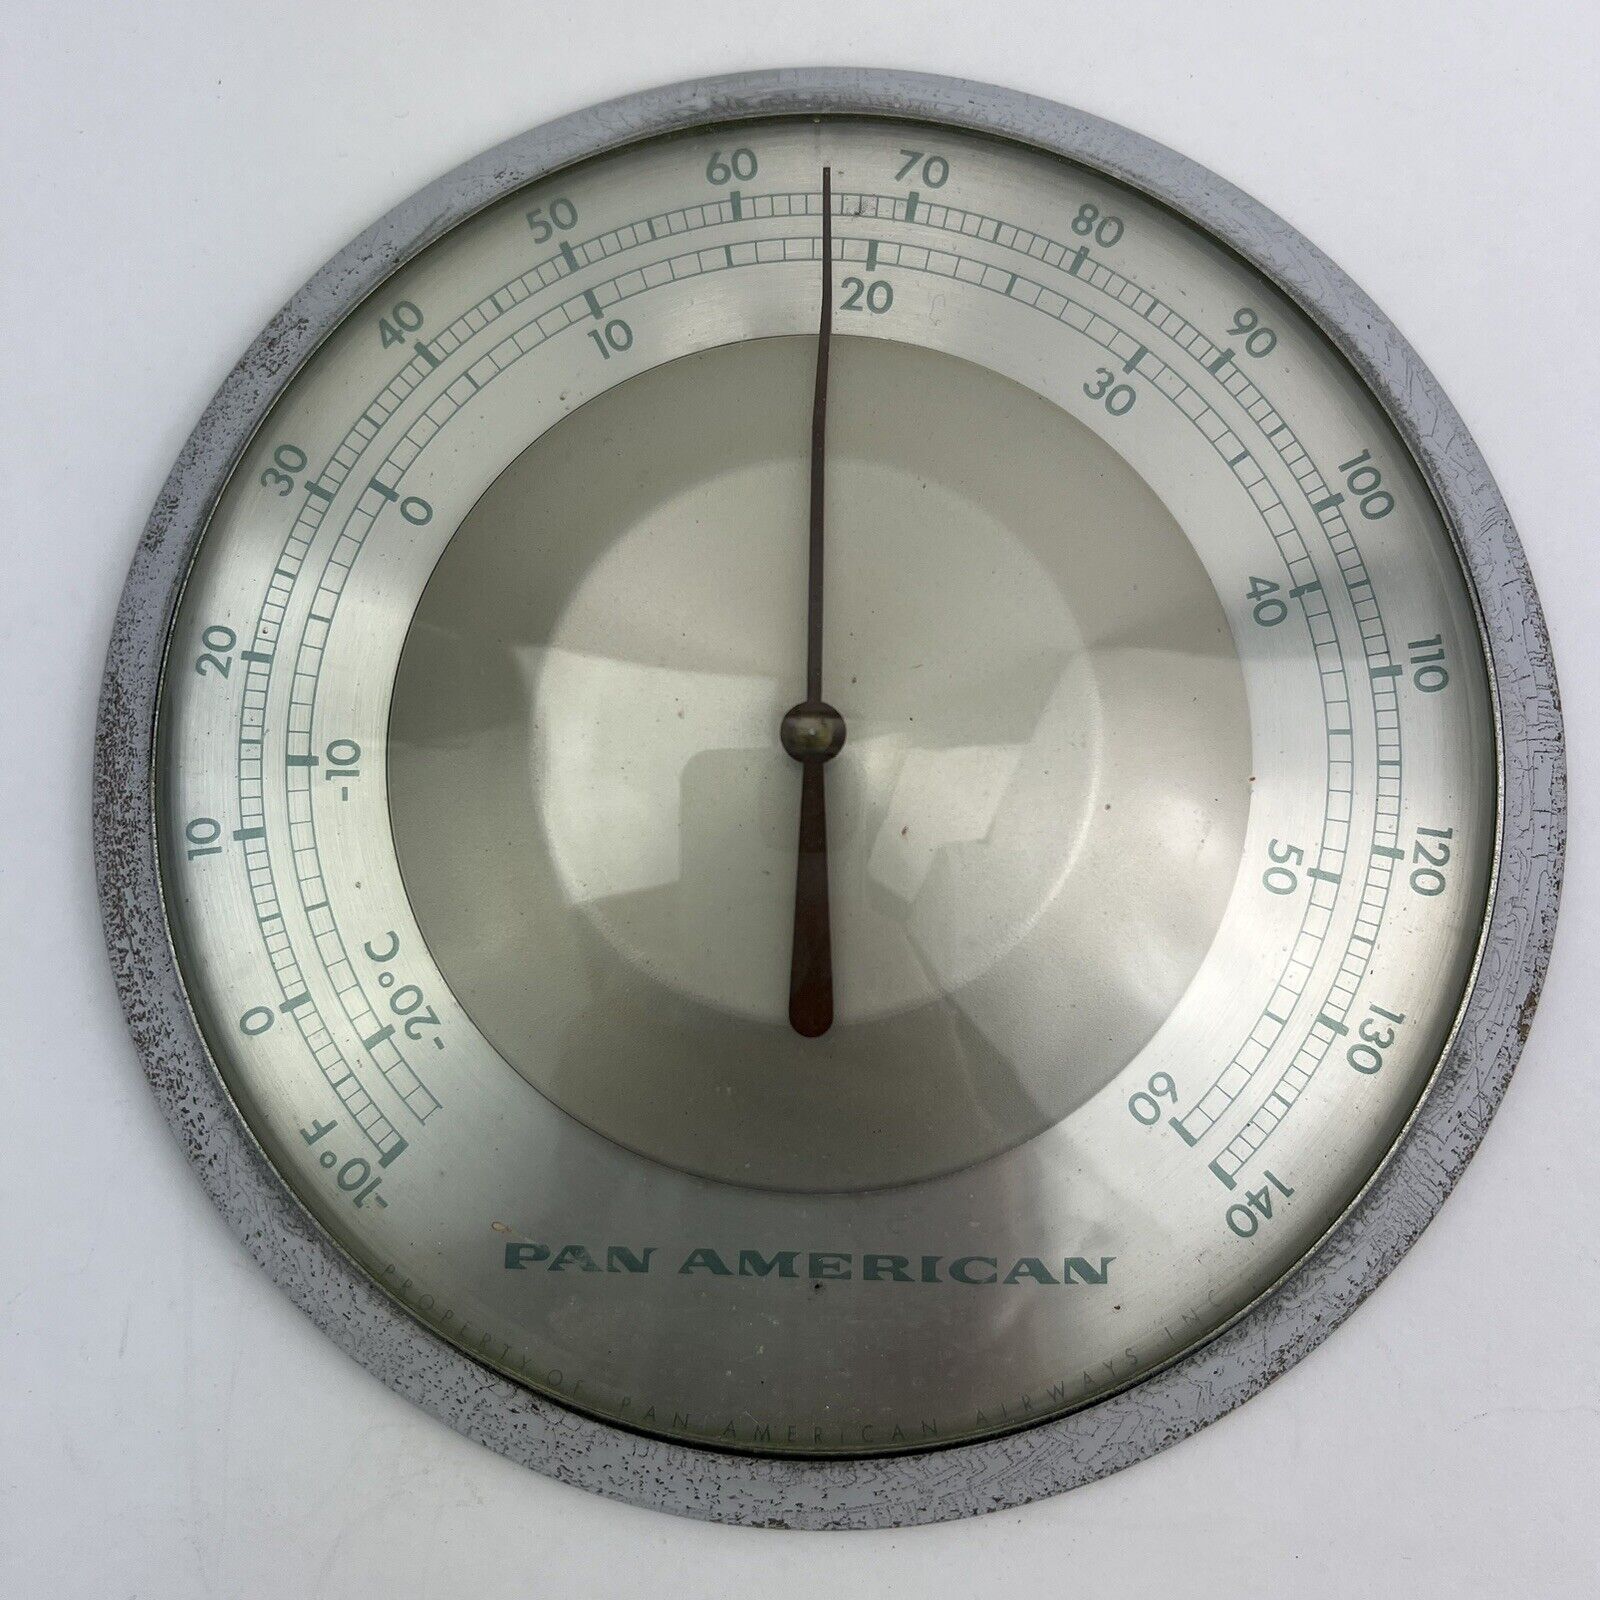 Vintage Pan American Airlines Advertising Thermometer Planes International Jet